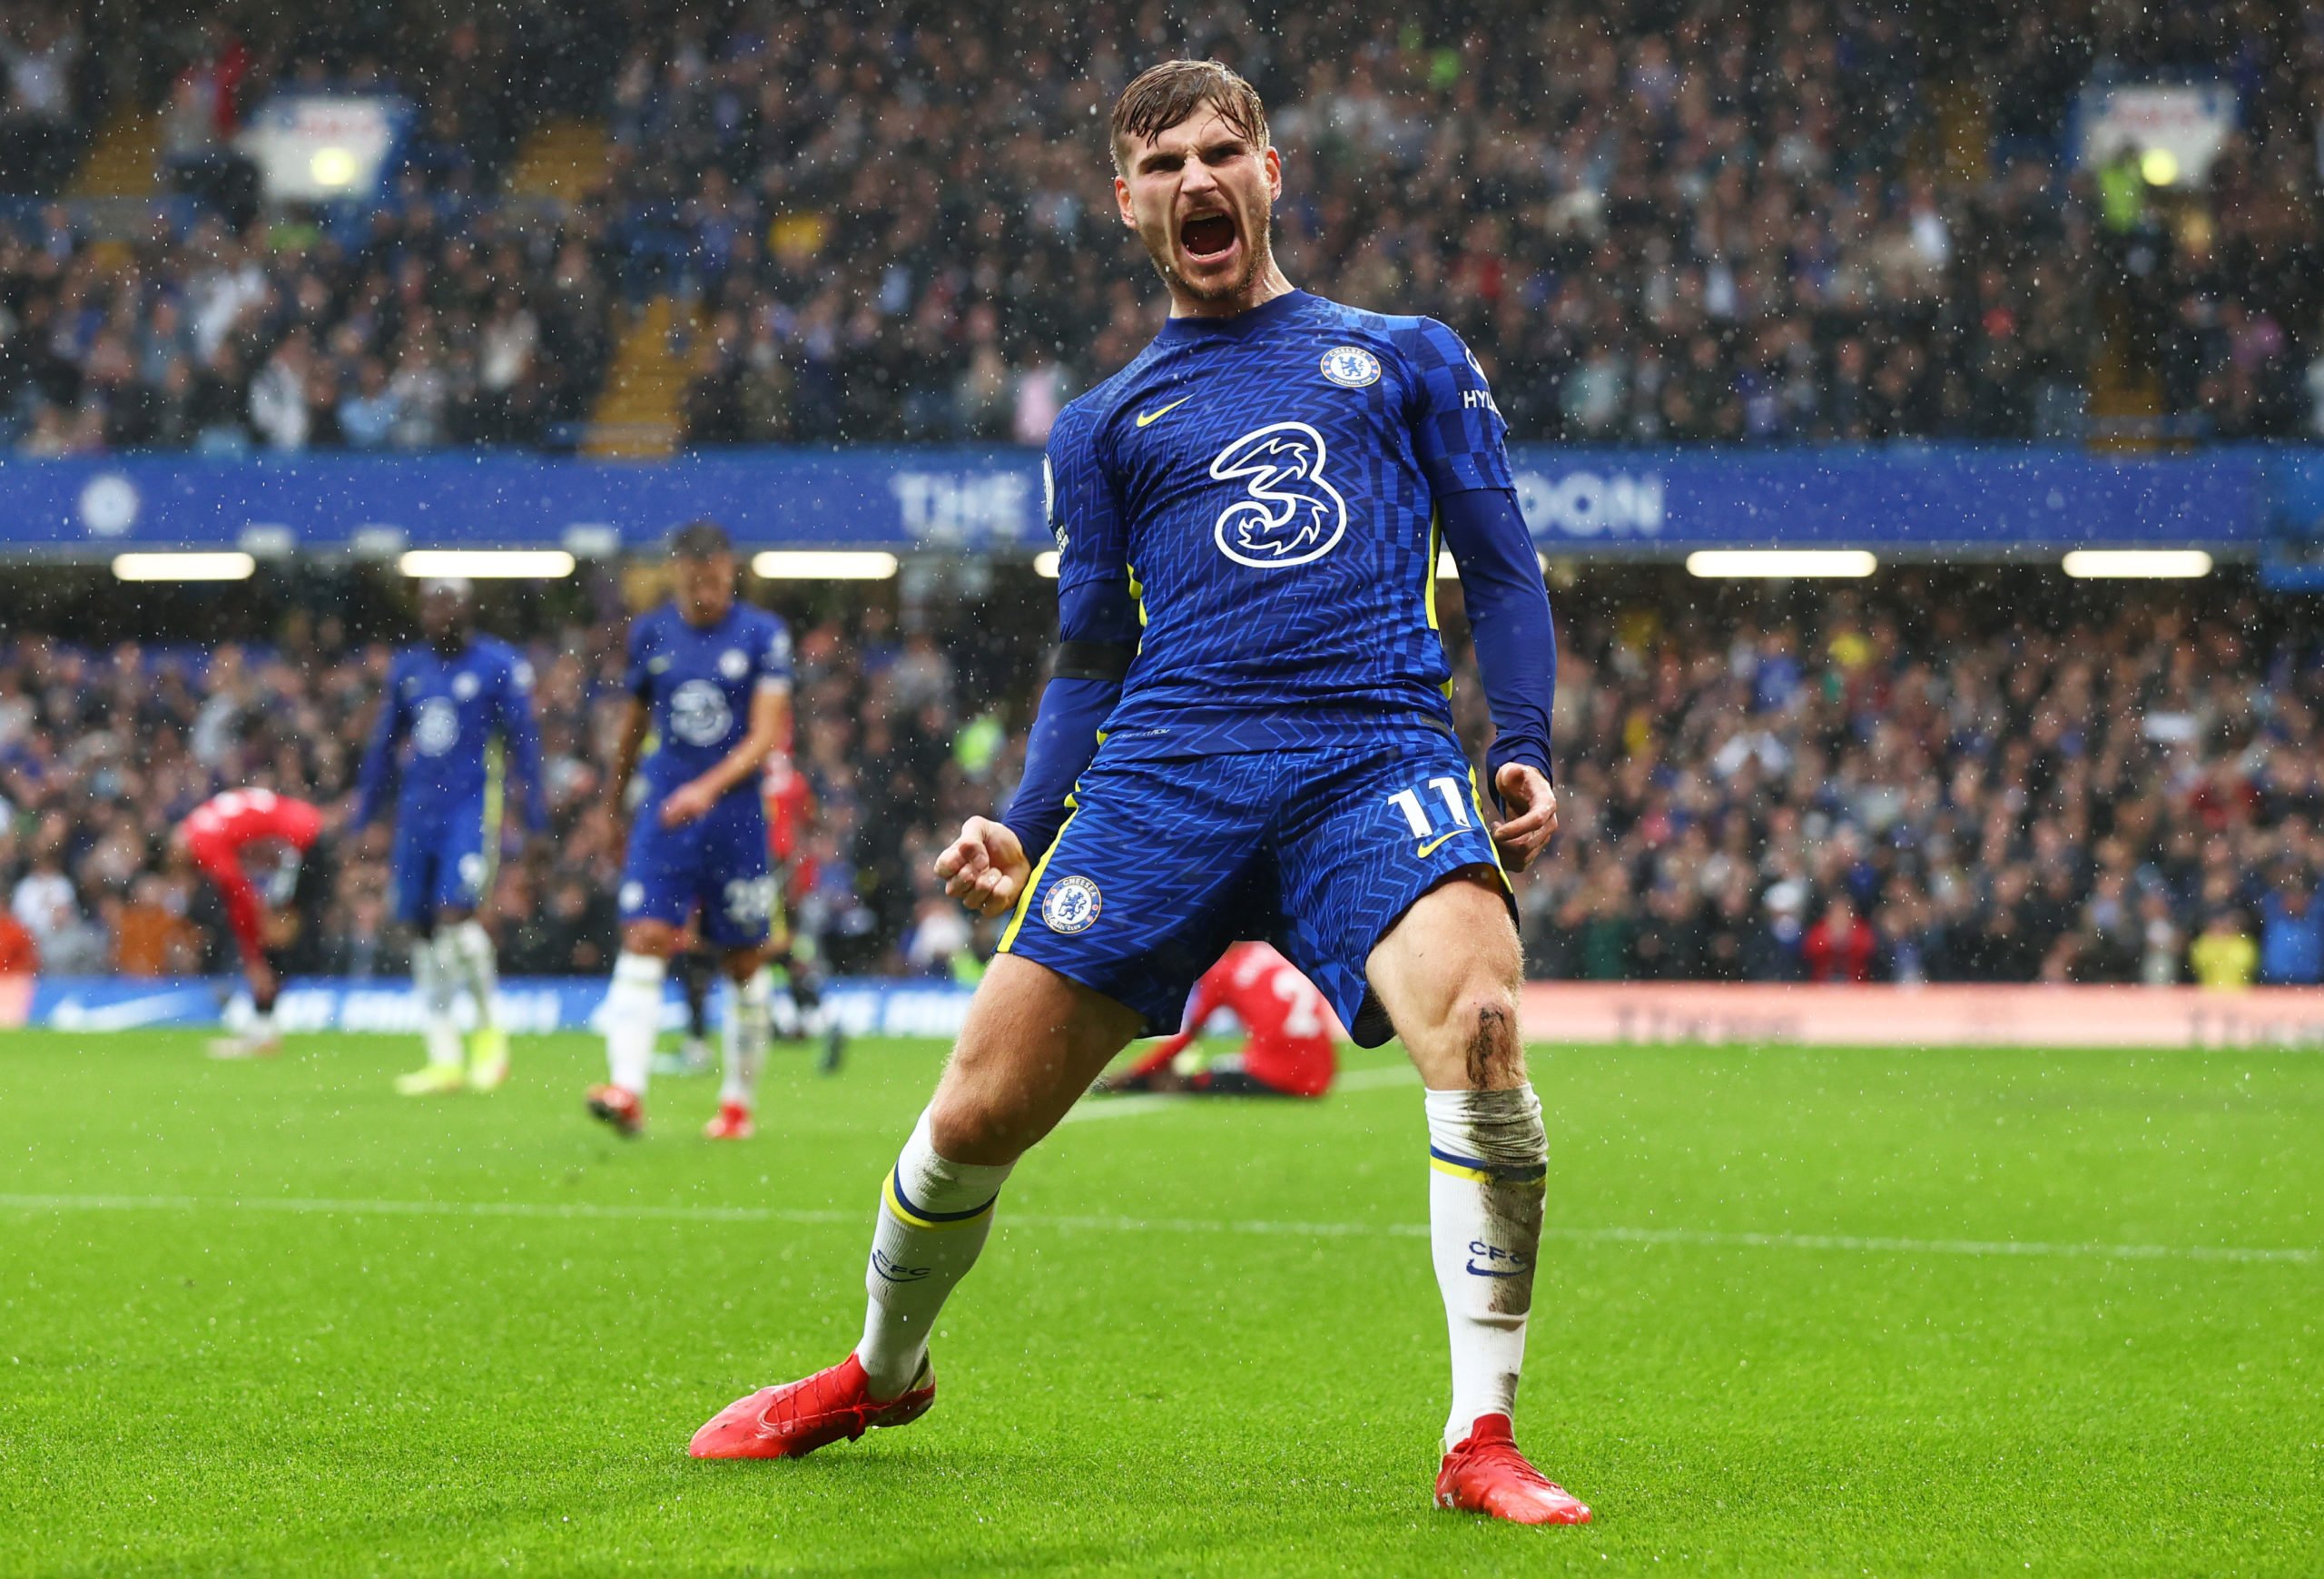 LONDON, ENGLAND - OCTOBER 02: Timo Werner of Chelsea celebrates a goal that is later disallowed by VAR during the Premier League match between Chelsea and Southampton at Stamford Bridge on October 02, 2021 in London, England. (Photo by Clive Rose/Getty Images)The 4th Official uses images provided by the following image agency: Getty Images (https://www.gettyimages.de/) Imago Images (https://www.imago-images.de/)